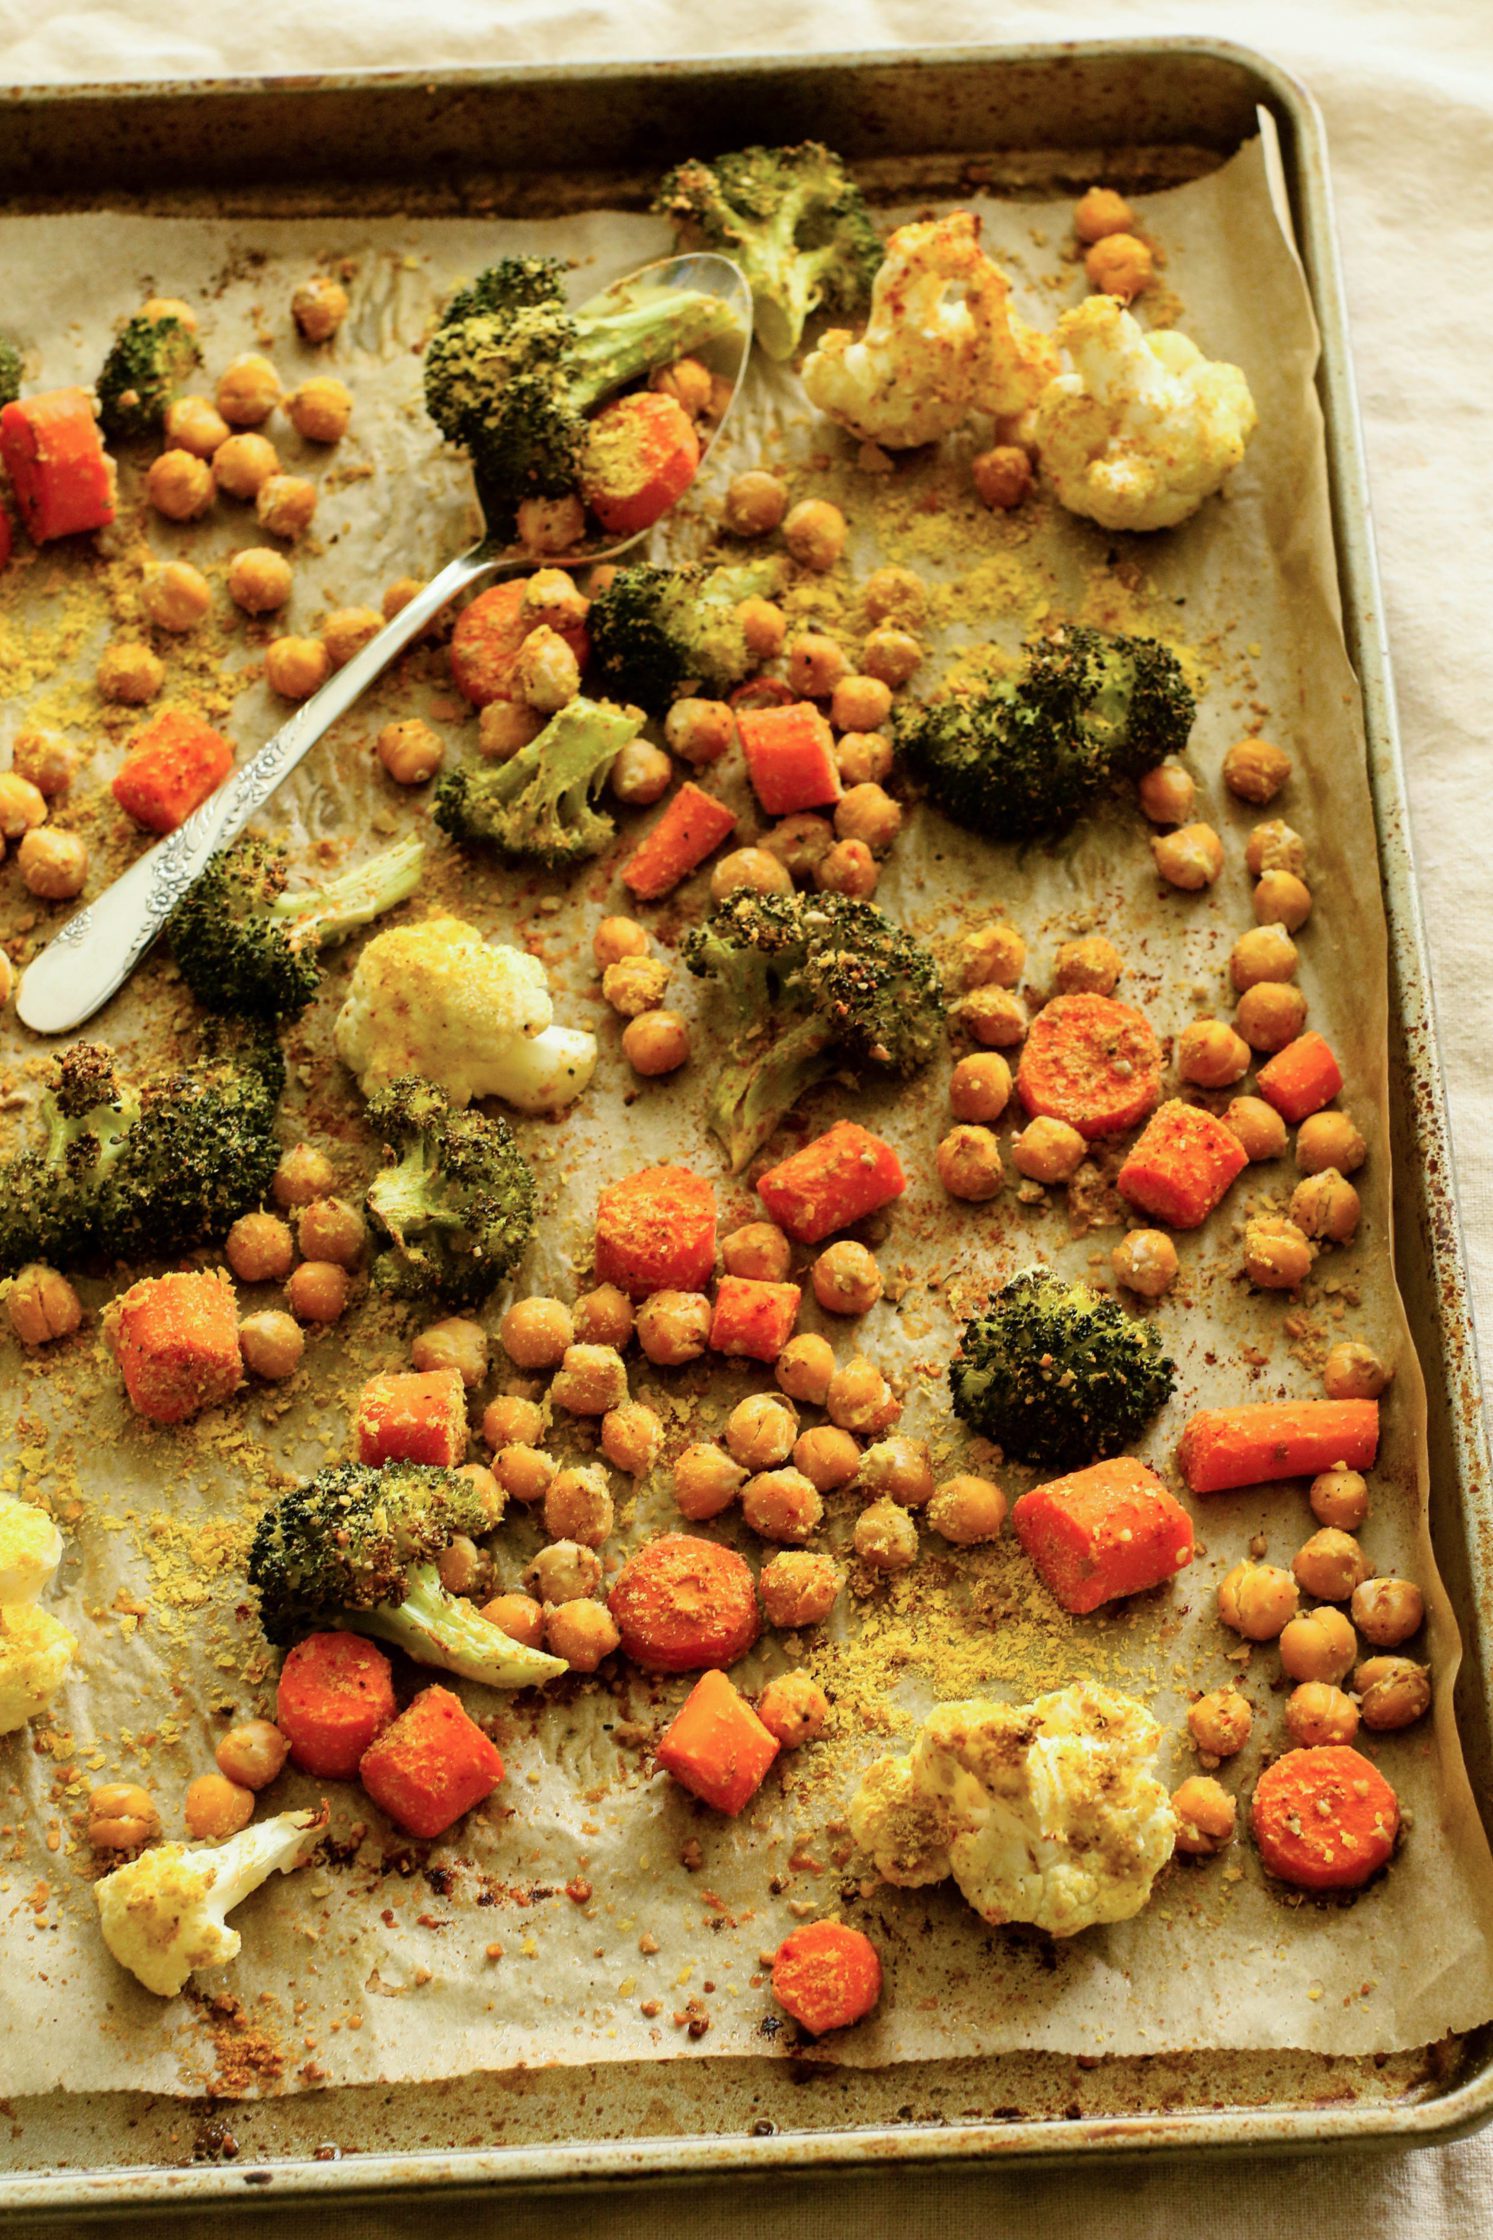 "Cheezy" Chickpea Sheet Pan Meal